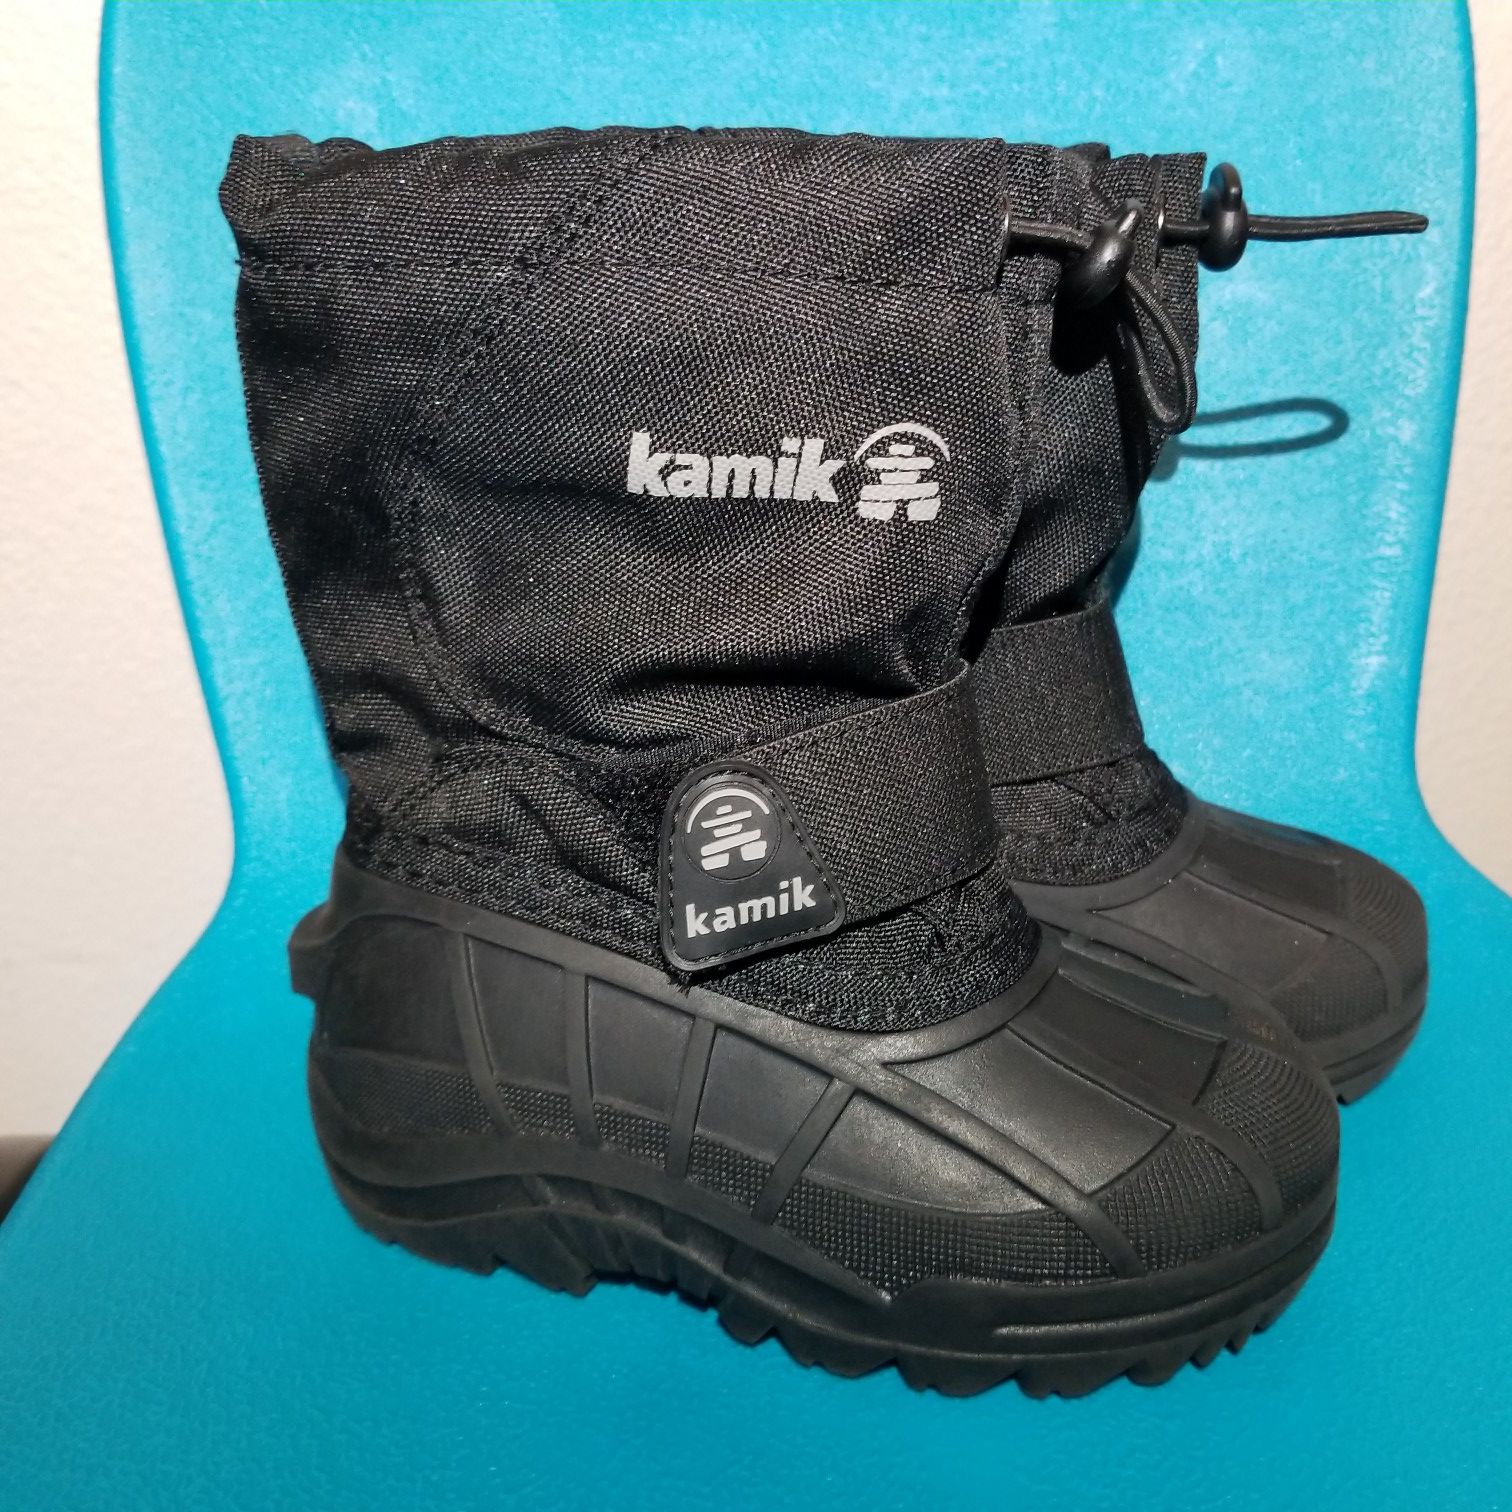 Toddler boy girl Kamik snow winter boots shoes size 8 size 8T